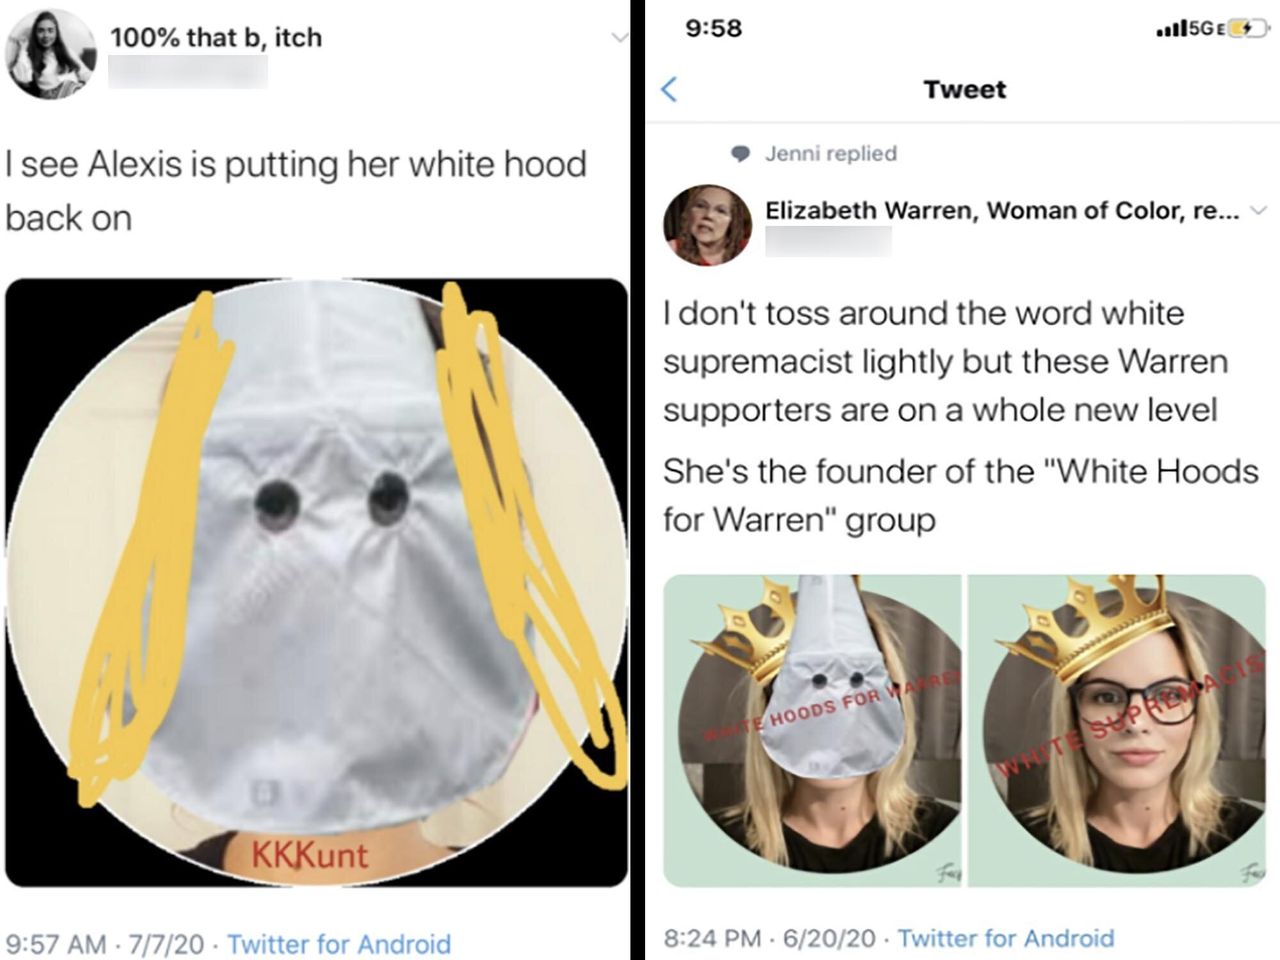 Multiple accounts lifted and photoshopped Lawson's profile image to show her wearing a Ku Klux Klan hood with the words "KKKunt" and "white supremacist."